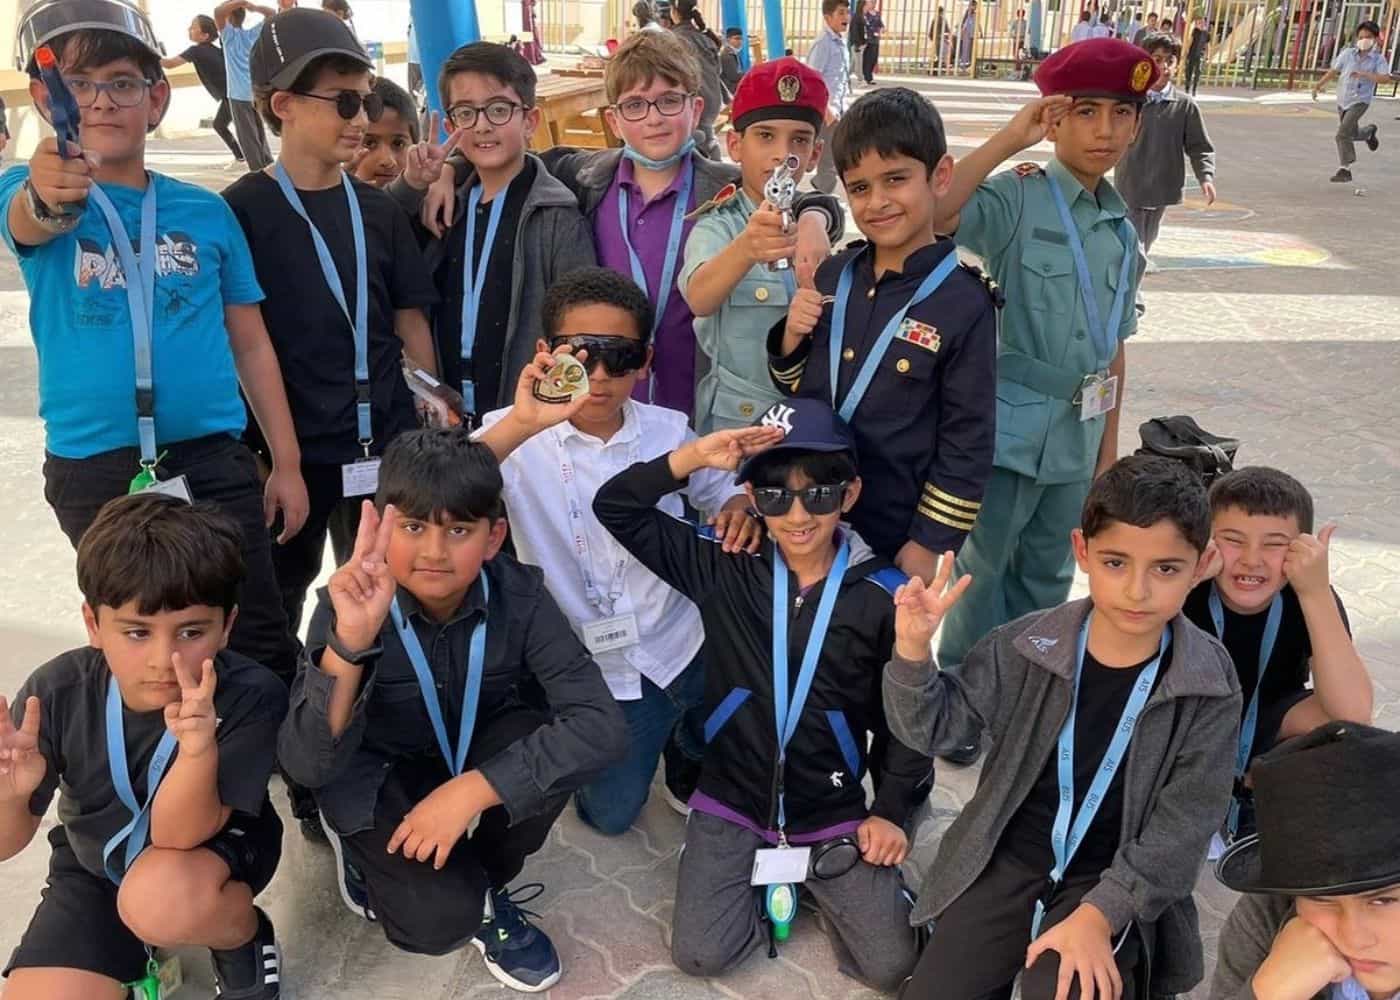 Grade 3 students of Abu Dhabi International School at the Investigation event